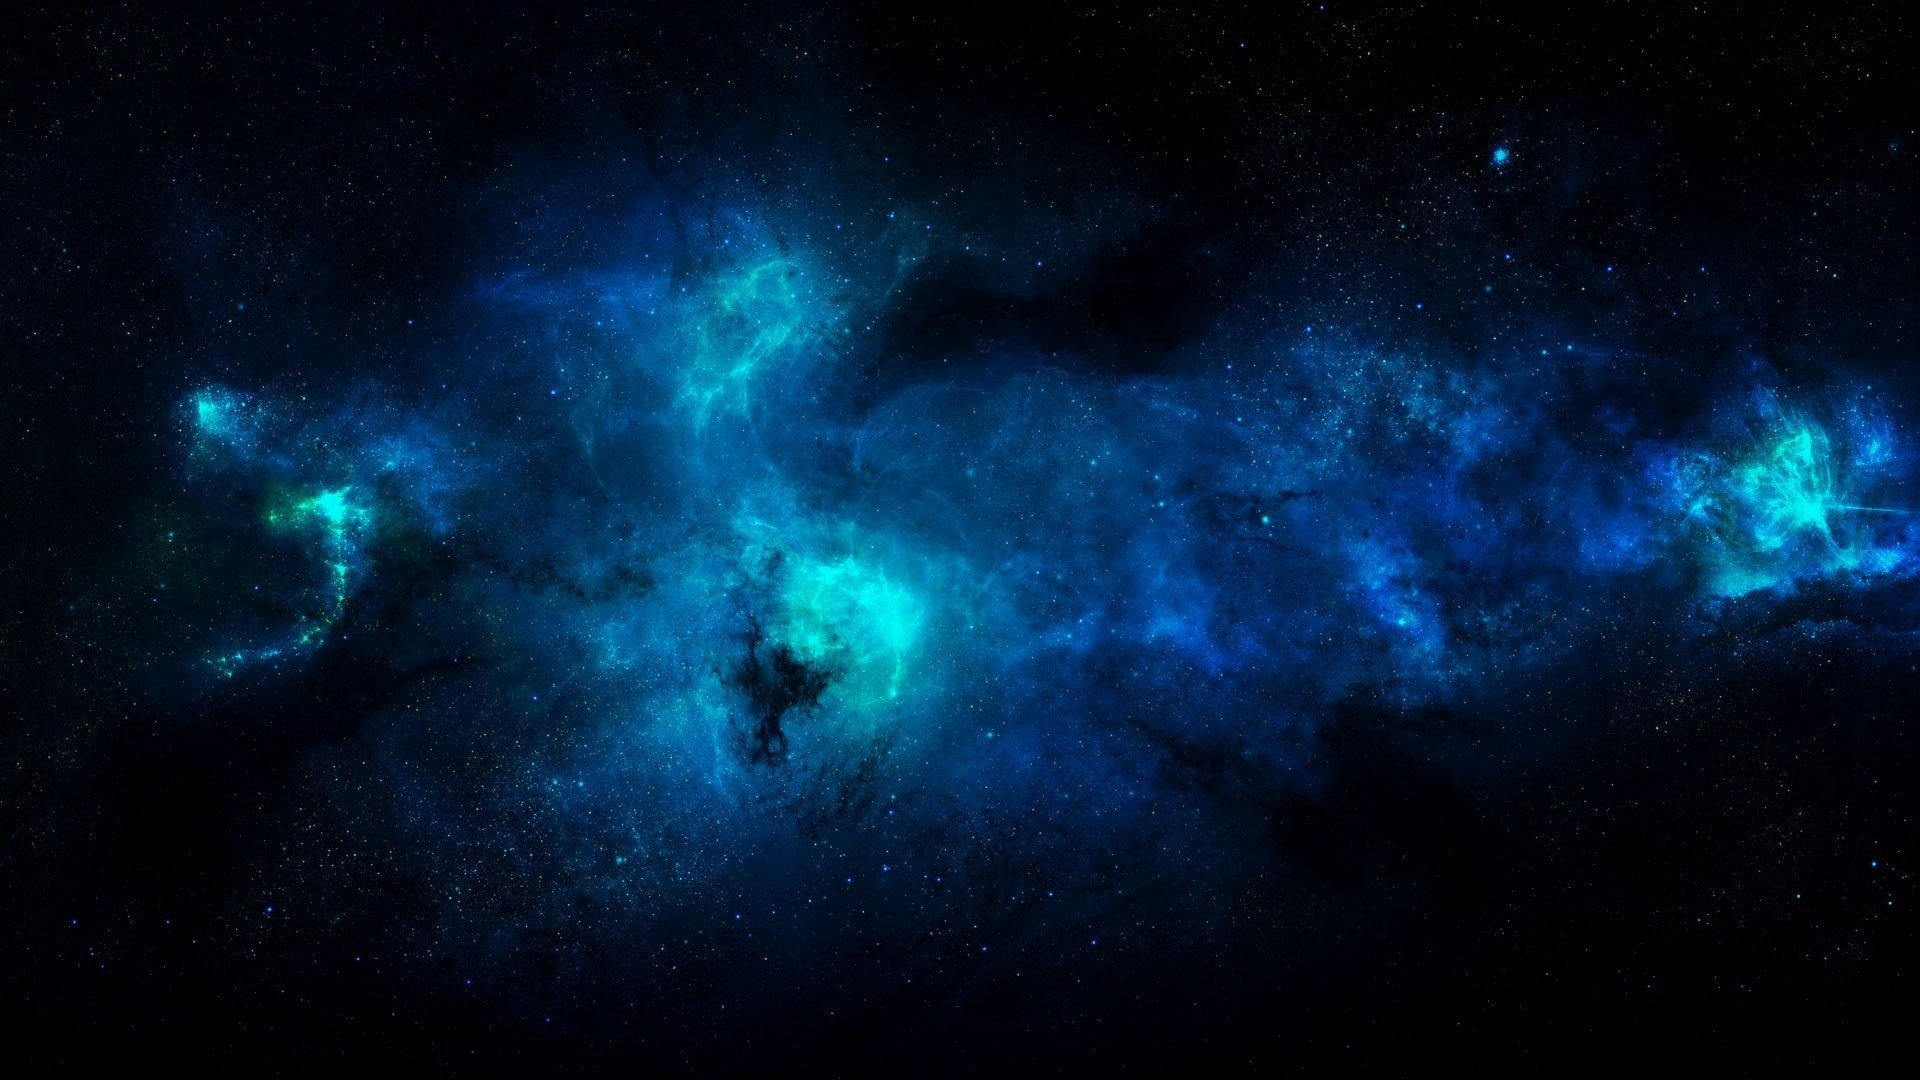 Cool Space Wallpapers 1920x1080 Full Hd 1080p Desktop Backgrounds